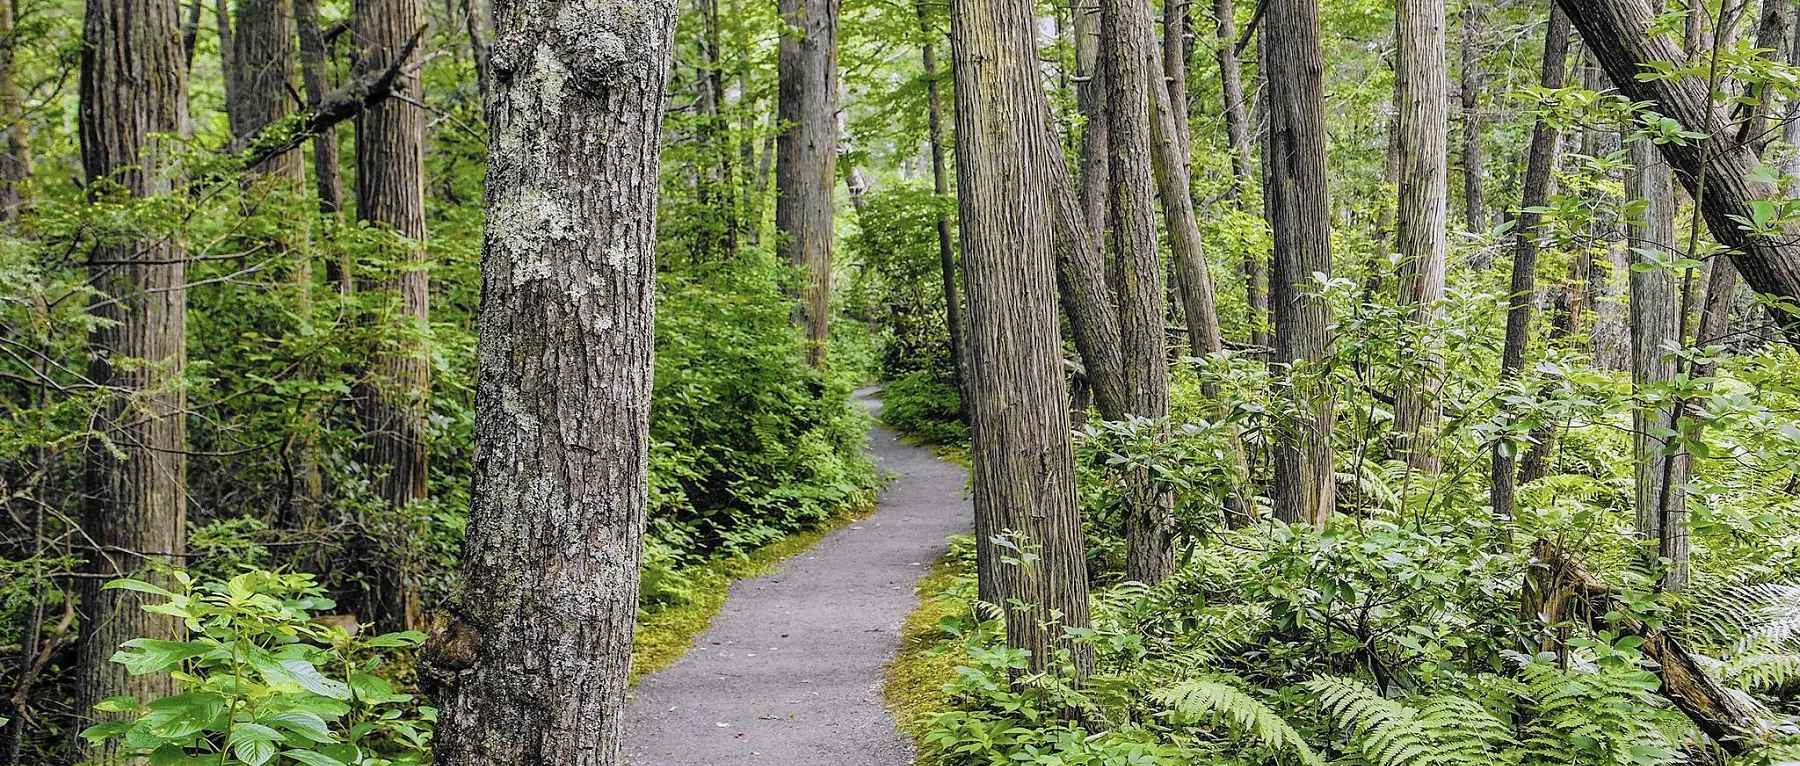 Rhododendron Trail in Pachaug State Forest - Voluntown, CT - Photo Credit Mark Mirko & Hartford Courant